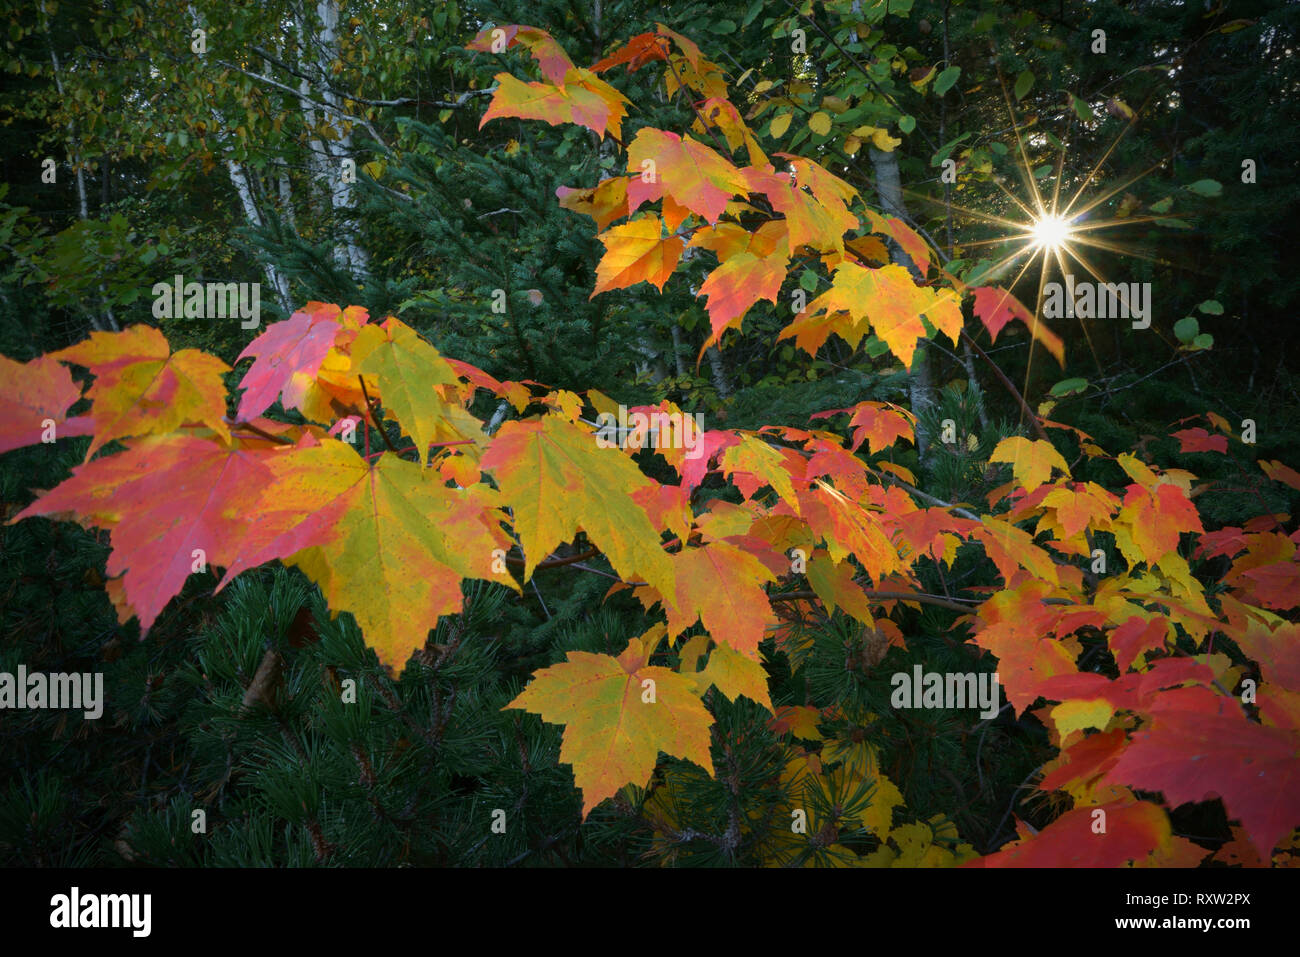 Autumn scenery at a rest stop along Route 101,on the east shore of Lake Temiskaming in Quebec. Canada. Stock Photo